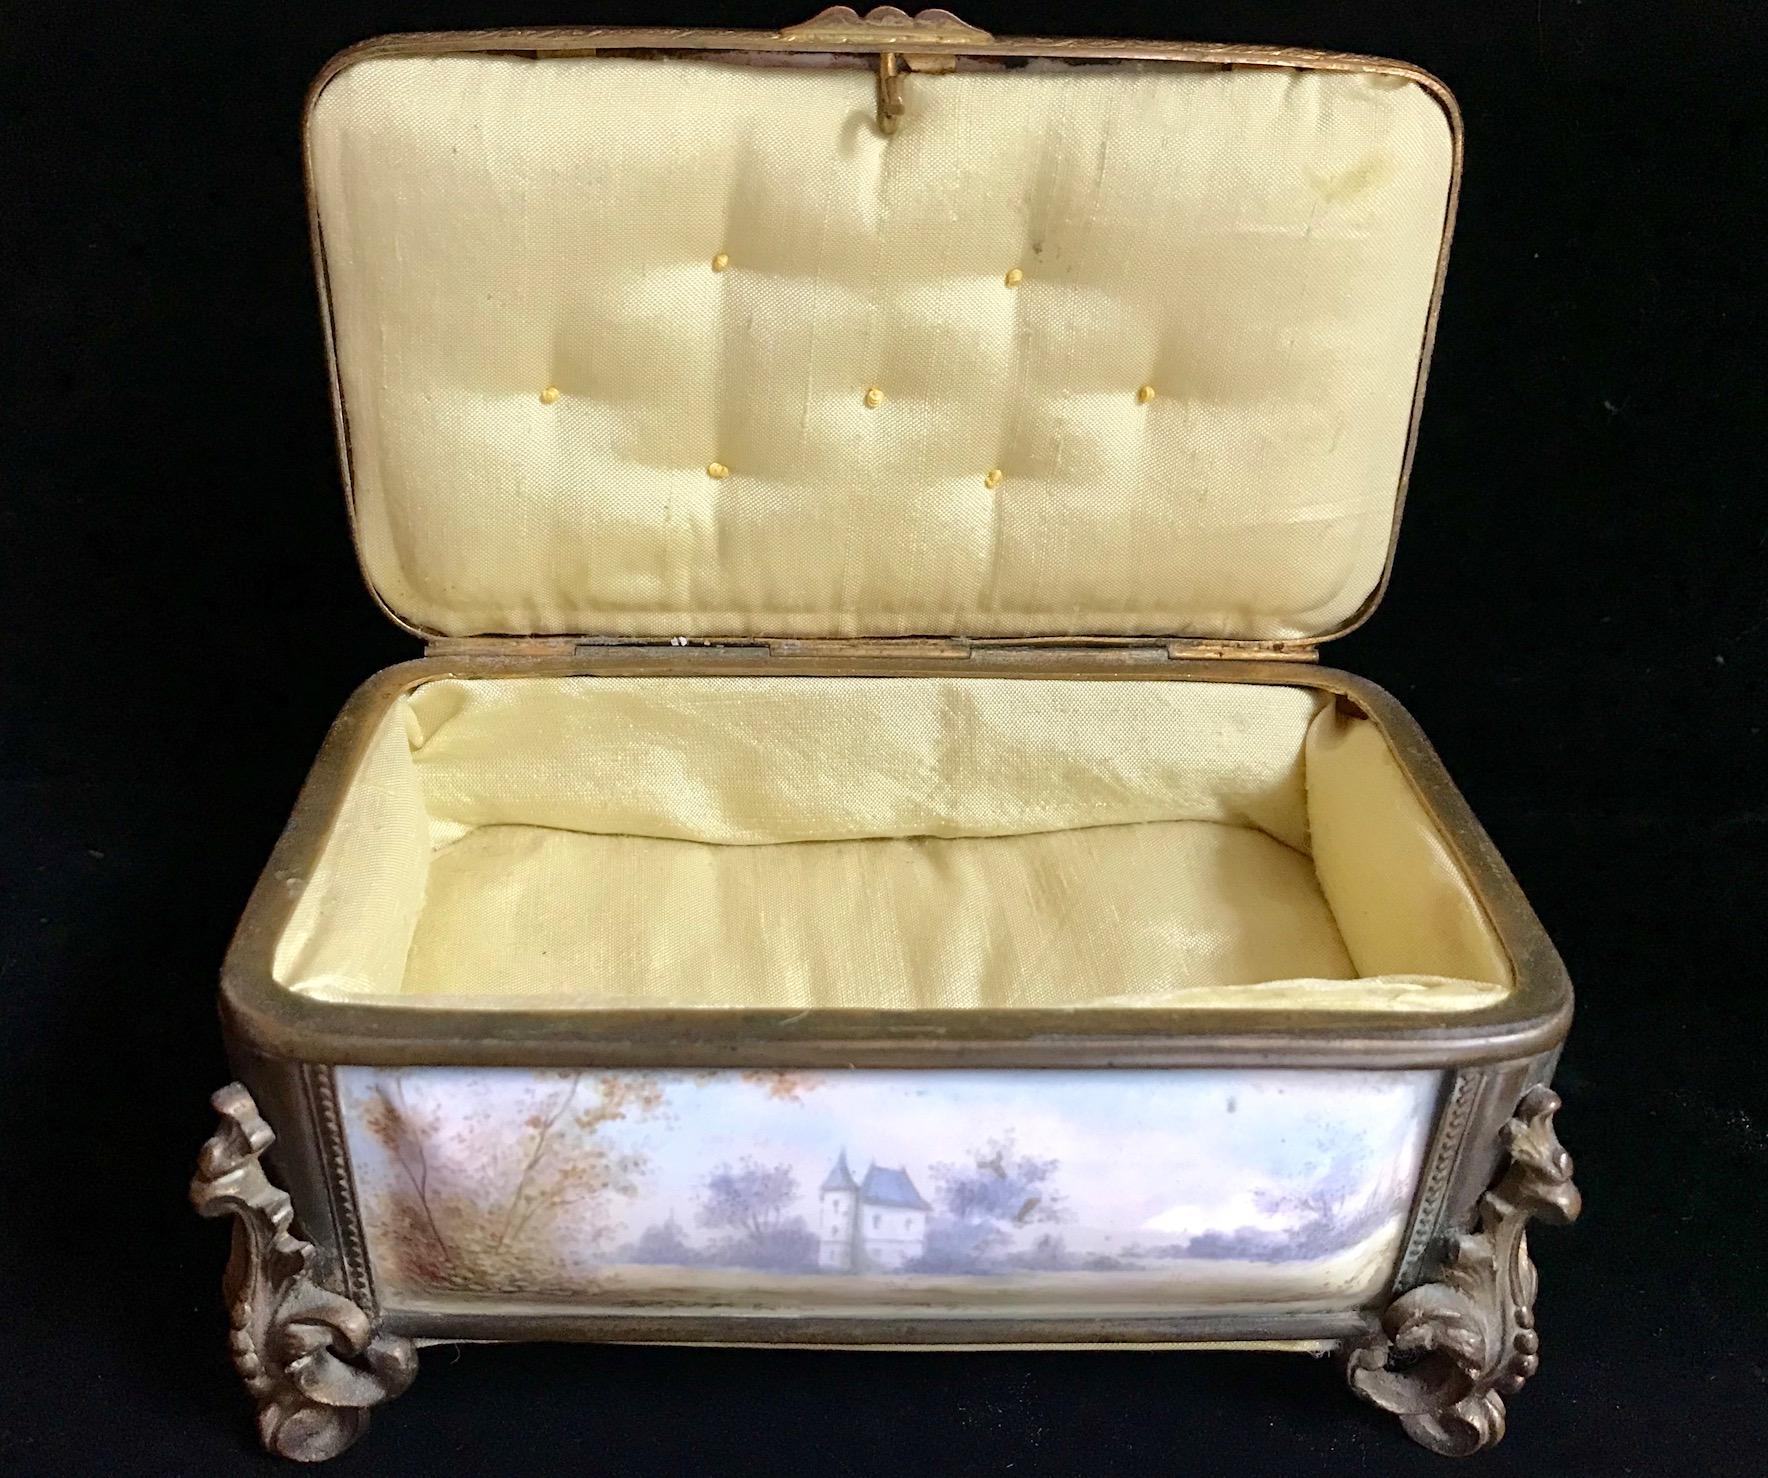 19th Century French Polychrome Enamel and Bronze Jewelry Box Casket For Sale 3